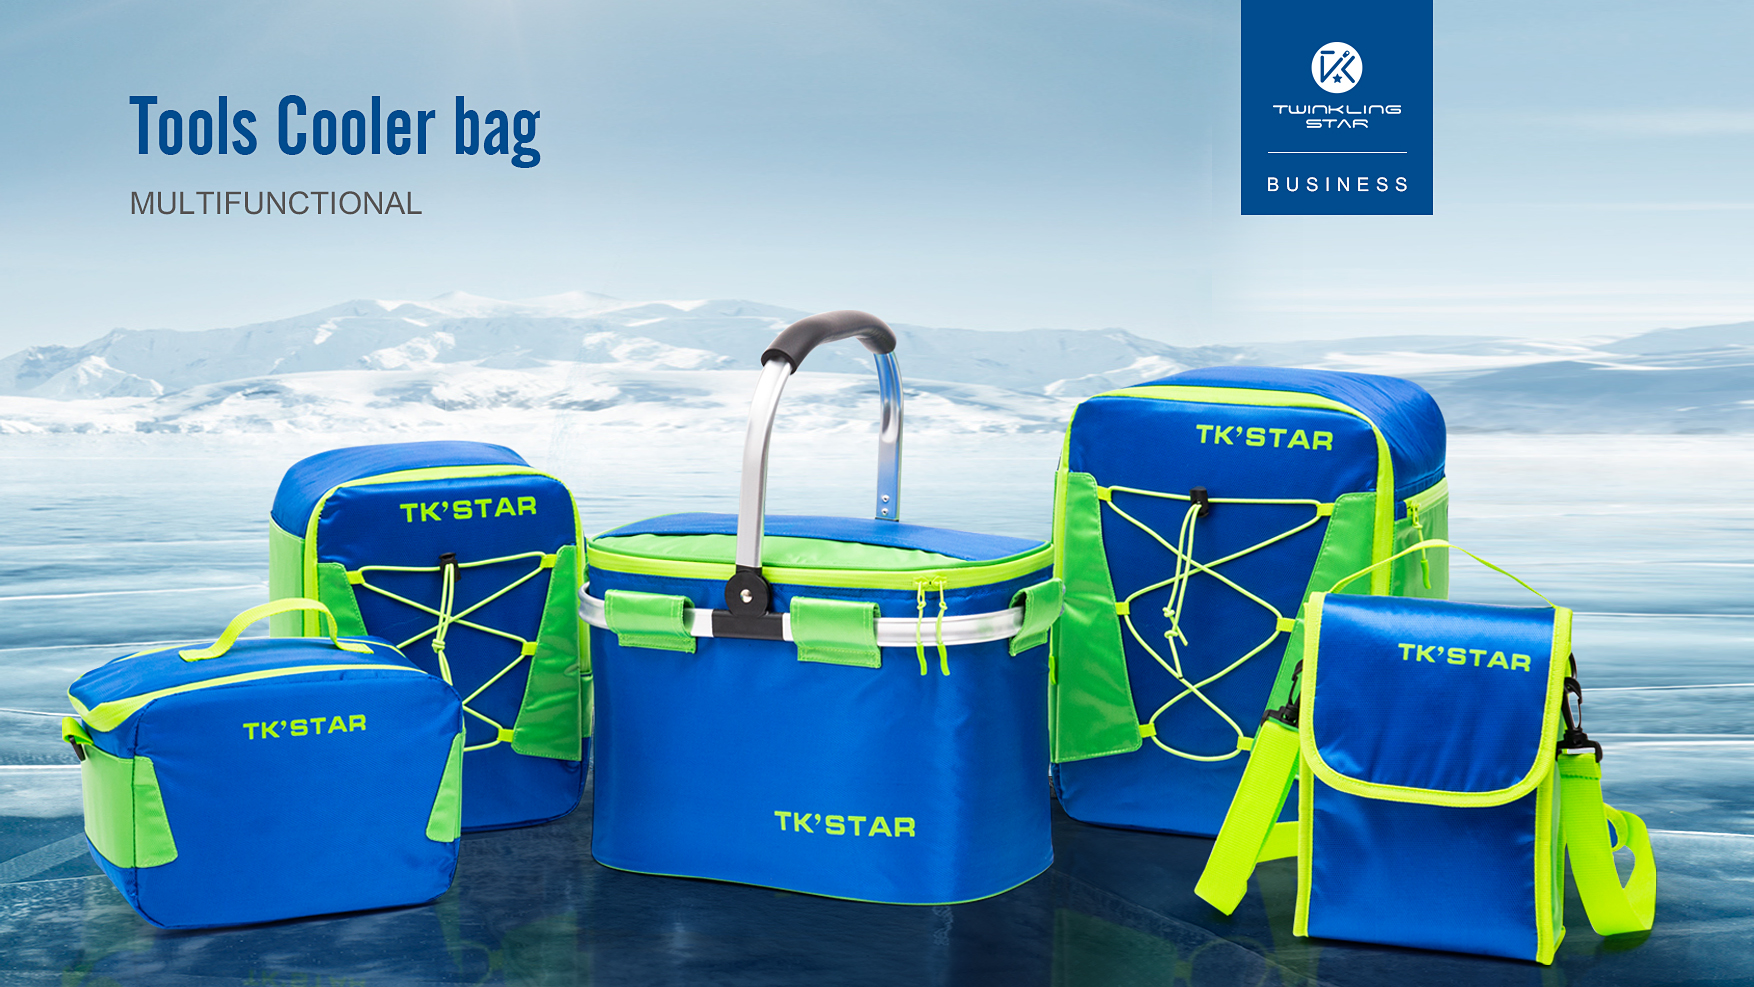 Twinkling Star|Outdoor Travel essentials-Functional Cooler collection